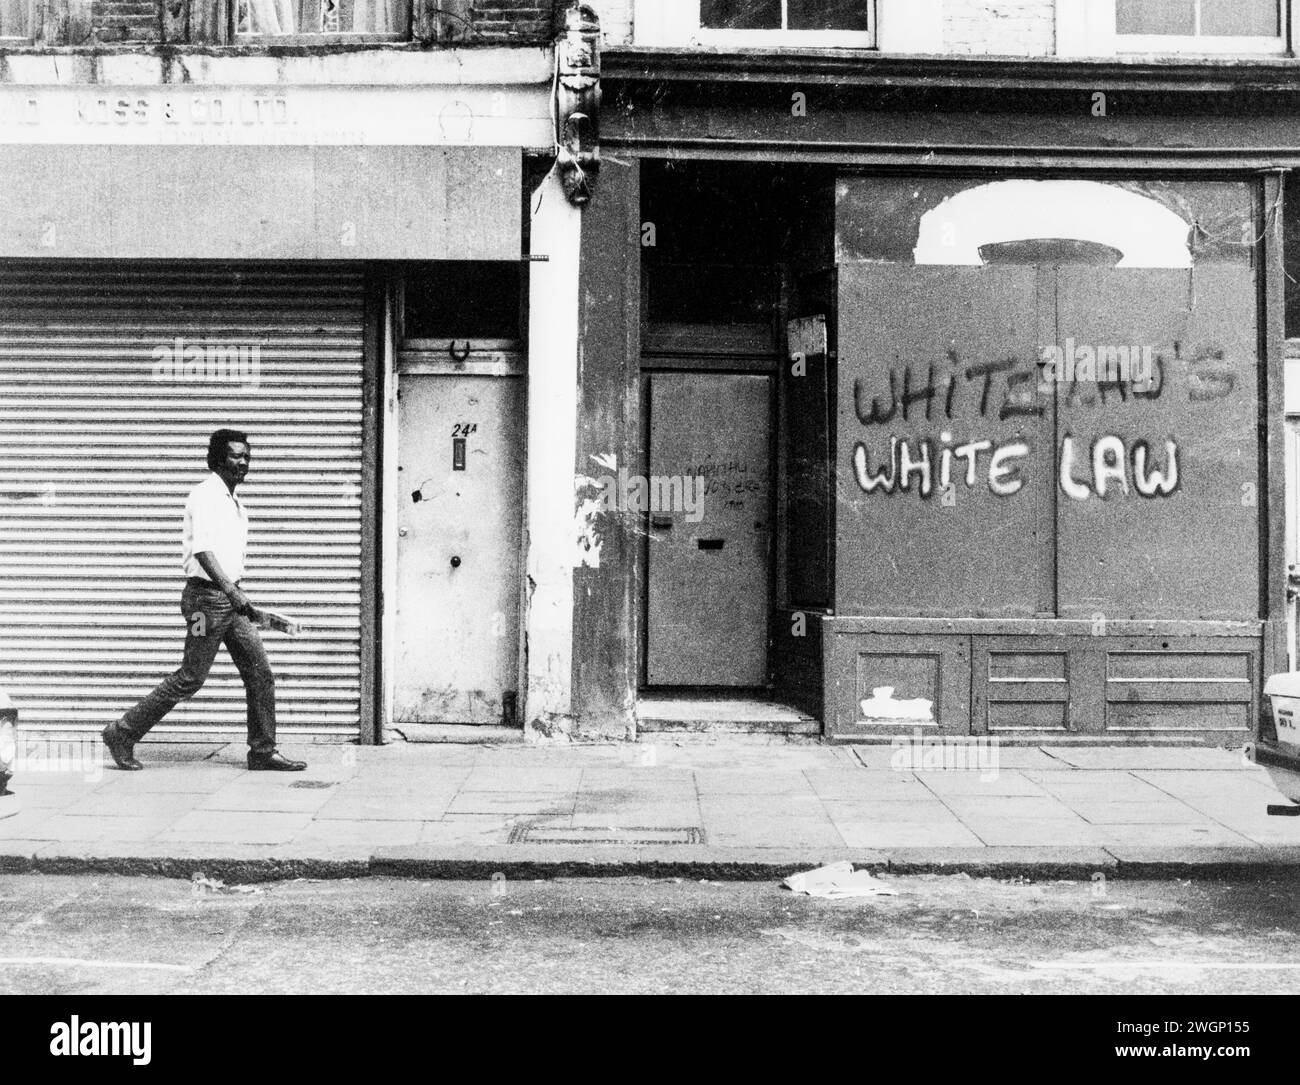 Graffiti on a shop front, 22 All Saints Road near the Mangrove Restaurant, Notting Hill, London, 1971. The restaurant was opened in 1968 by civil rights campaigner Frank Crichlow and was a meeting place for local Black community. Frequently raided by police leading to protests and a famous trial in 1971. The trial of the Mangrove Nine drew public attention to police racism, and turned the fight against it into a cause célèbre.The graffiti 'Whitelaws - White Law' alludes to the Conservative Home Secretary William Whitelaw and the position of the Conservative government to policing and racism. Stock Photo